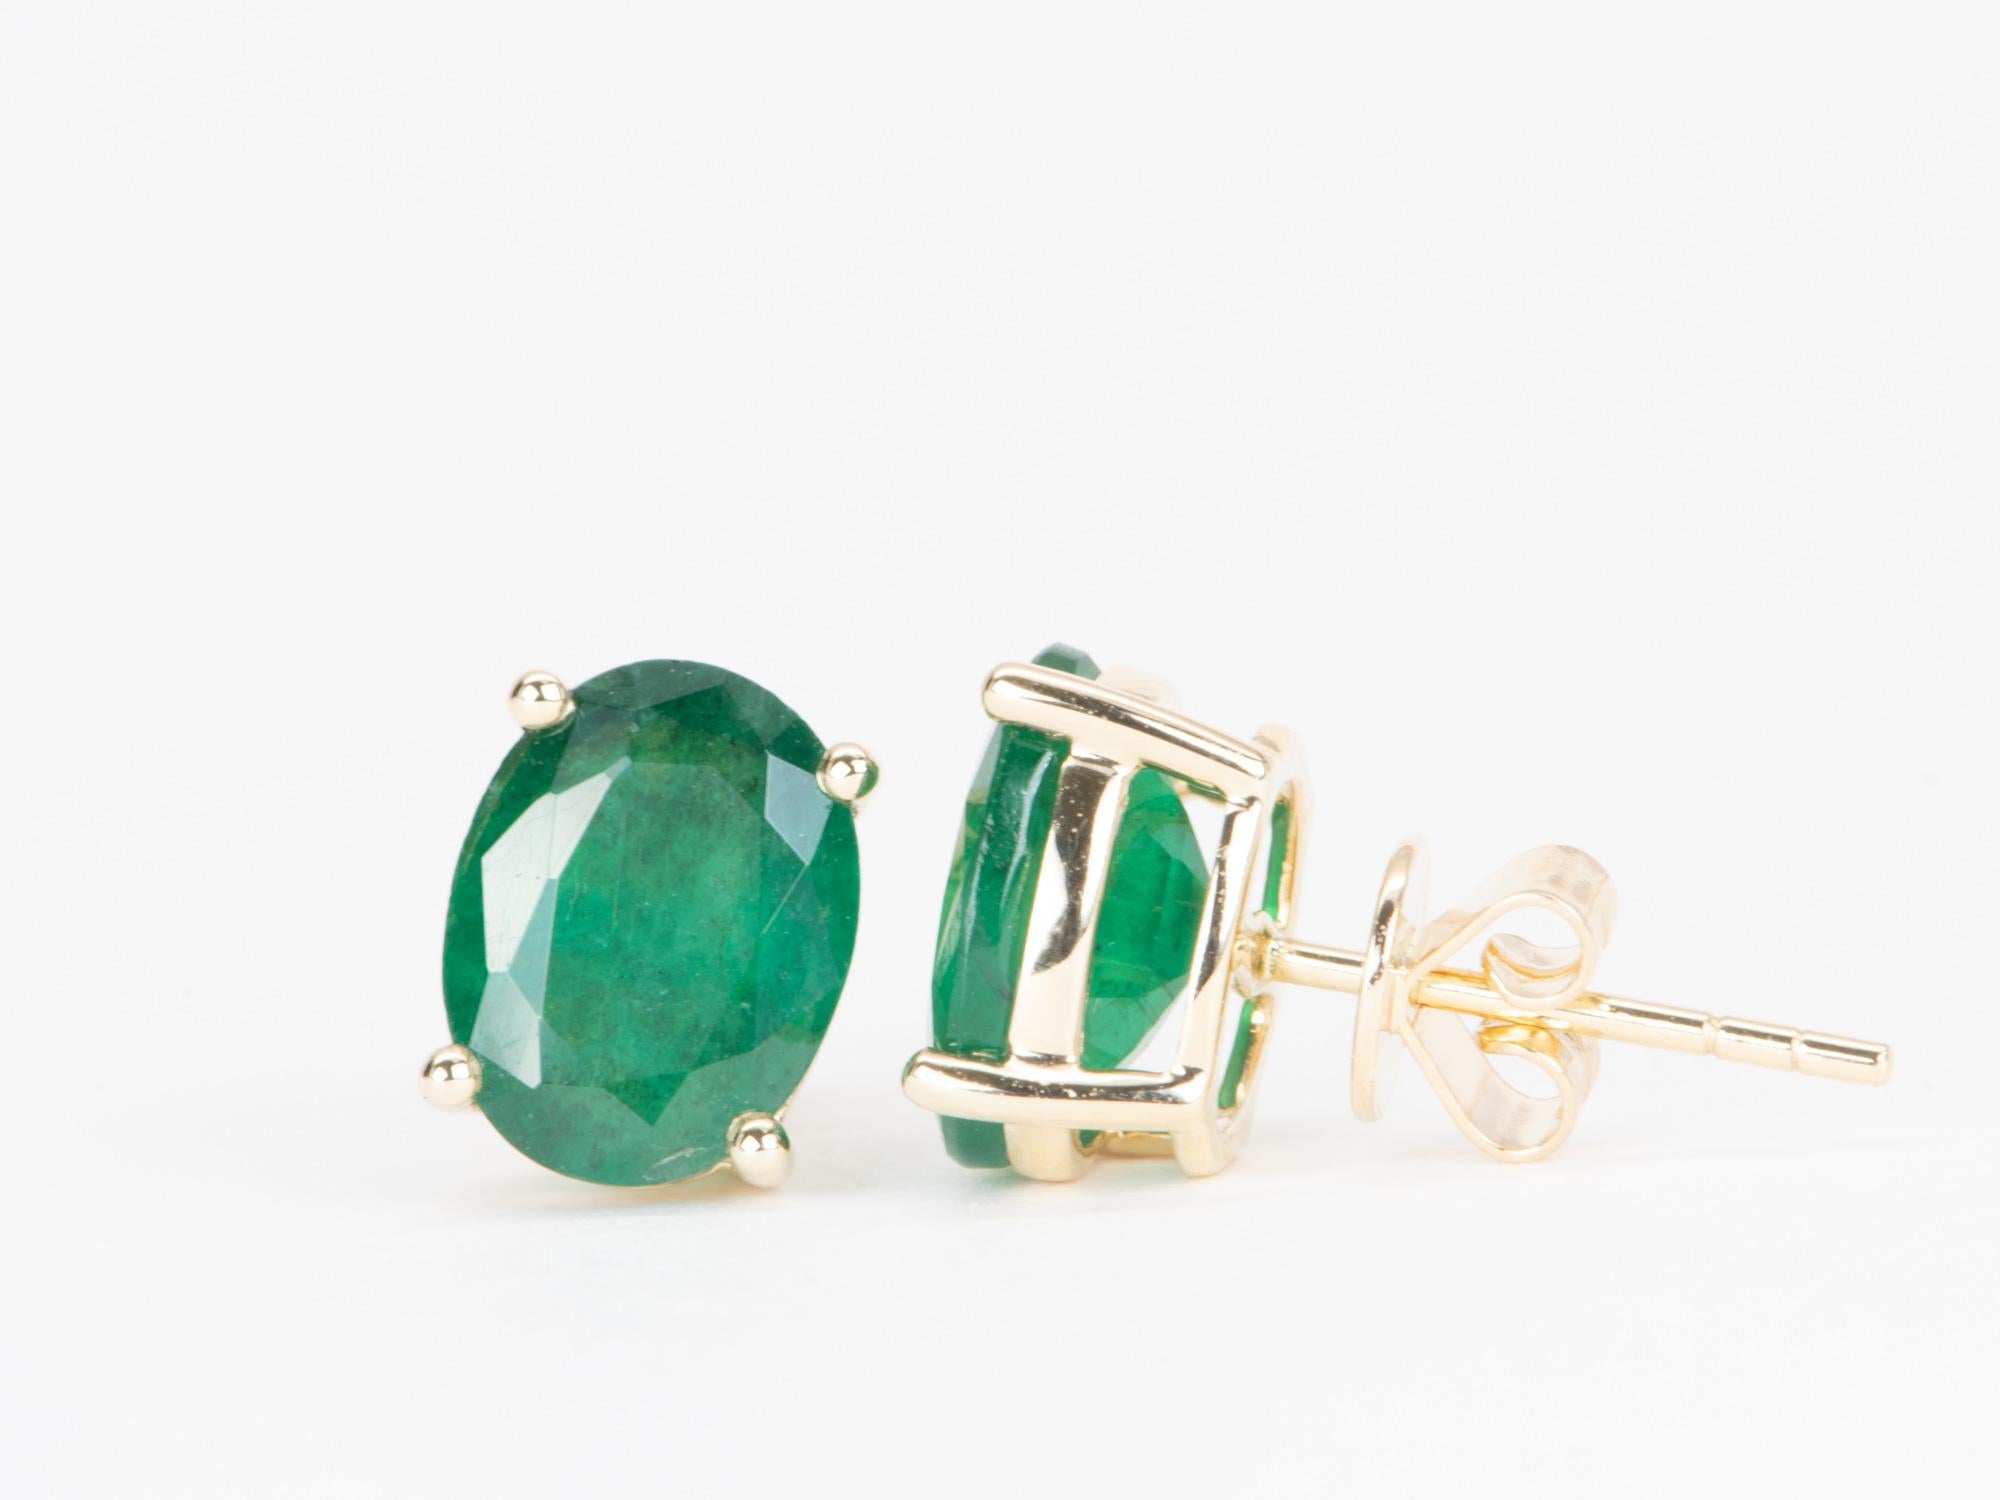   Make a bold, timeless statement with these beautiful 3.32ct oval emerald and 14K gold stud earrings! Show off your impeccable taste with natural emeralds, whose brilliant green hue will add instant sophistication to your everyday look. A brilliant